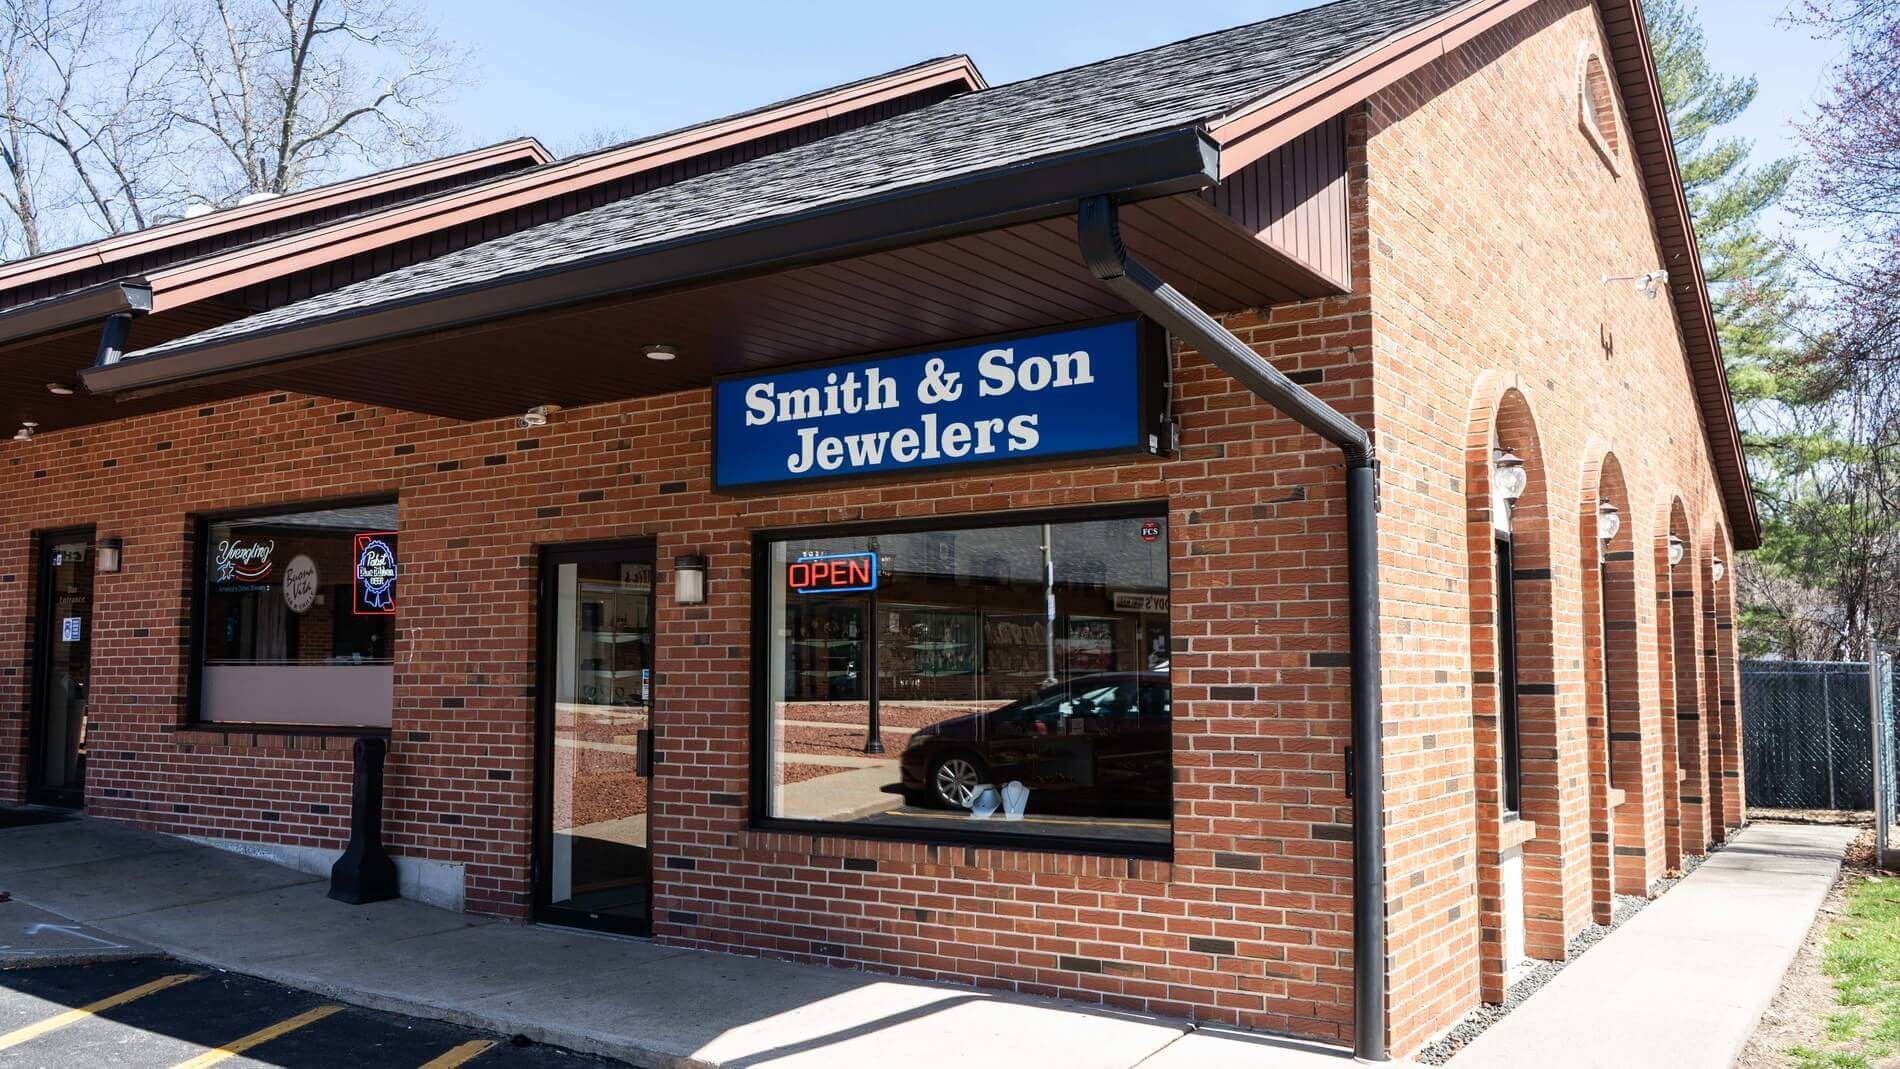 Smith & Son Jewelers – We don’t sell diamonds, we help you buy them